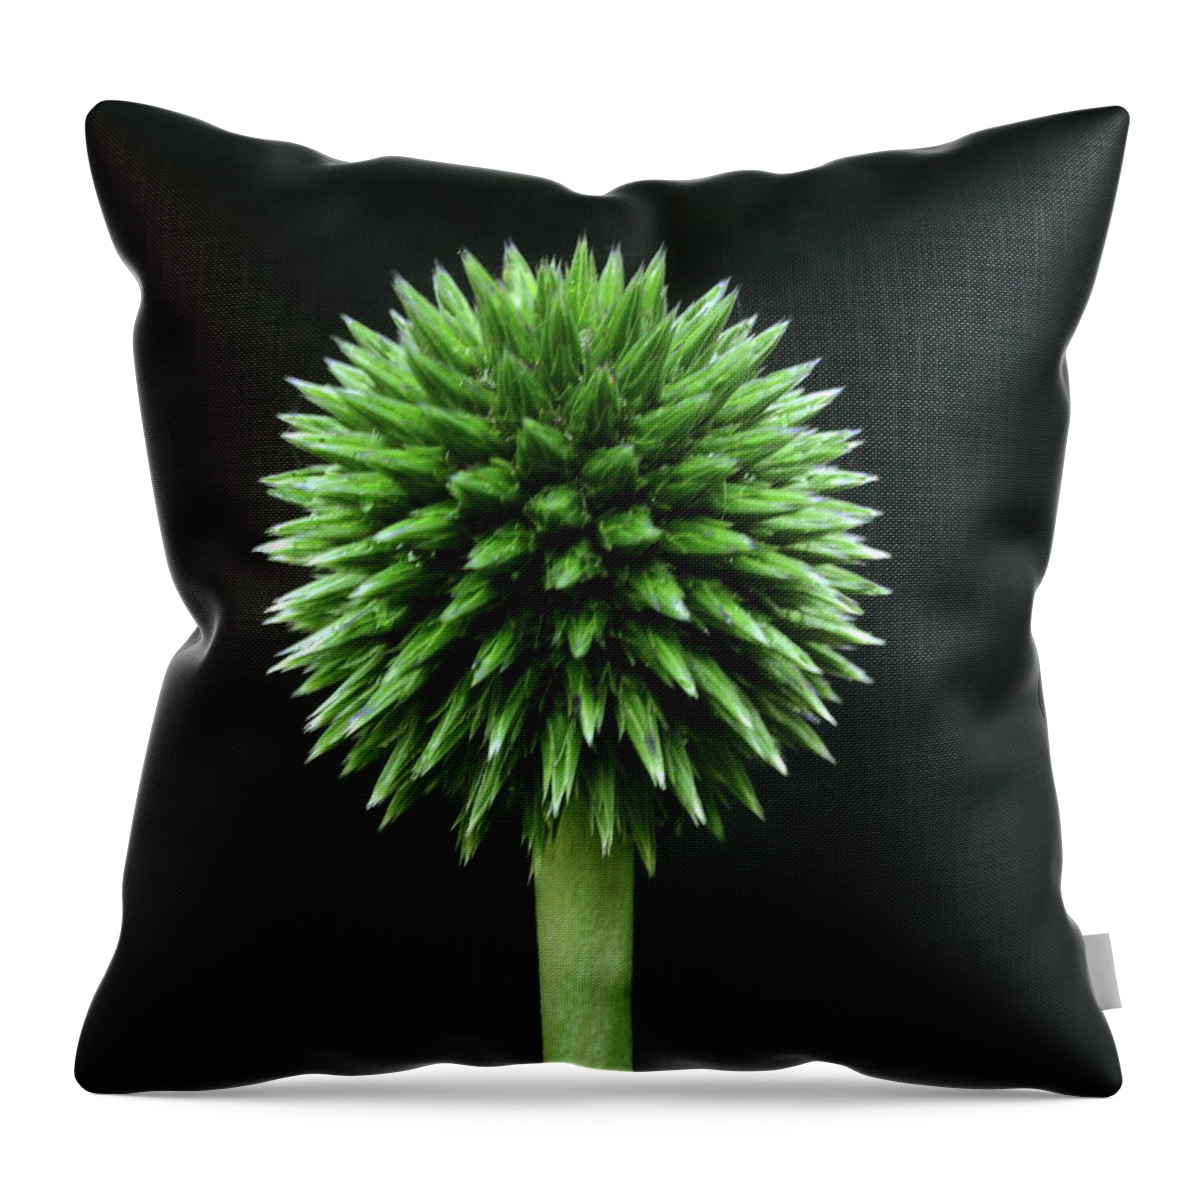 Flower Echinops Flower Head Green Plant Horticulture Abstract Minimalist Black Background Structural Stem Stalk Raindrops Throw Pillow featuring the photograph Echinops by Jeff Townsend